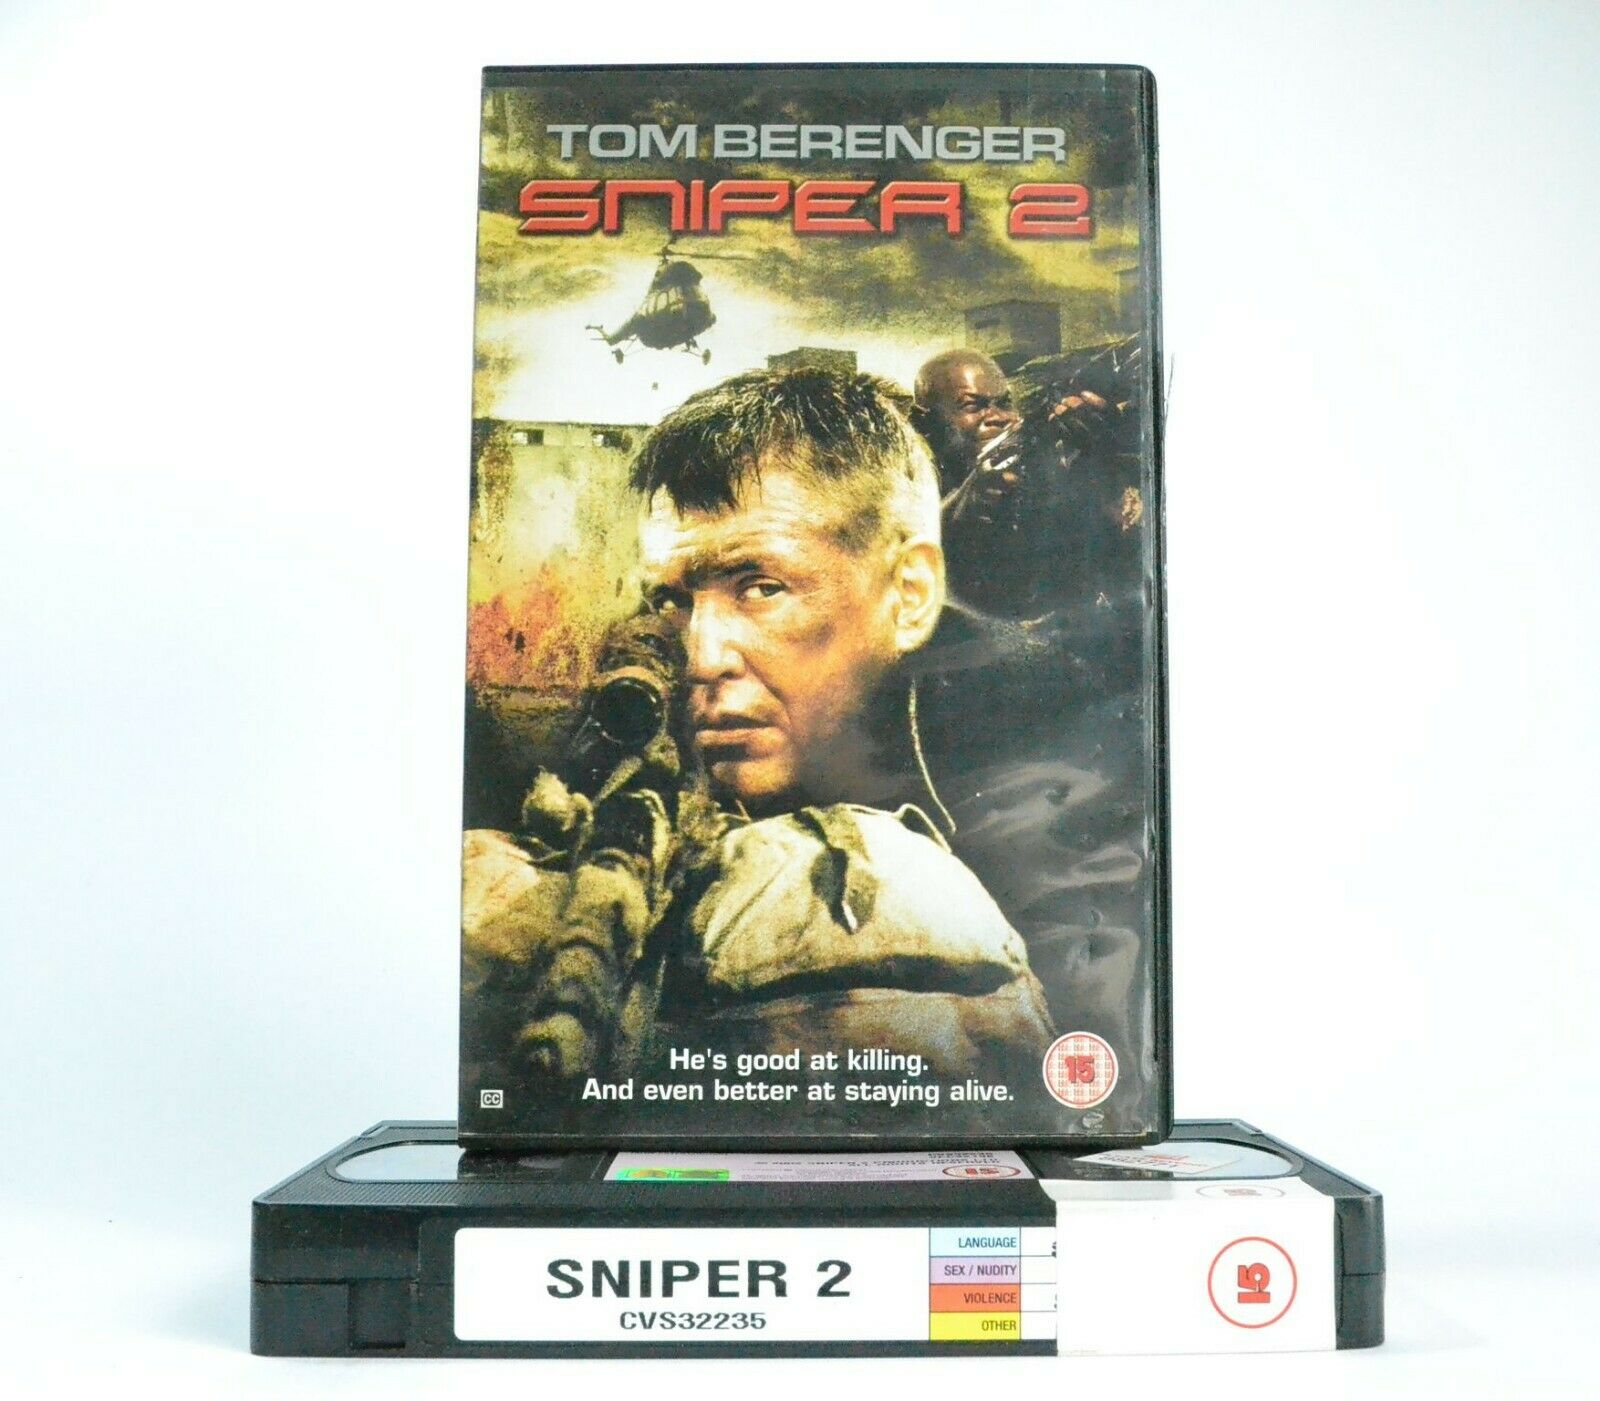 Sniper 2: Film By C.R.Baxley - Action (2003) - Large Box - Tom Berenger - VHS-